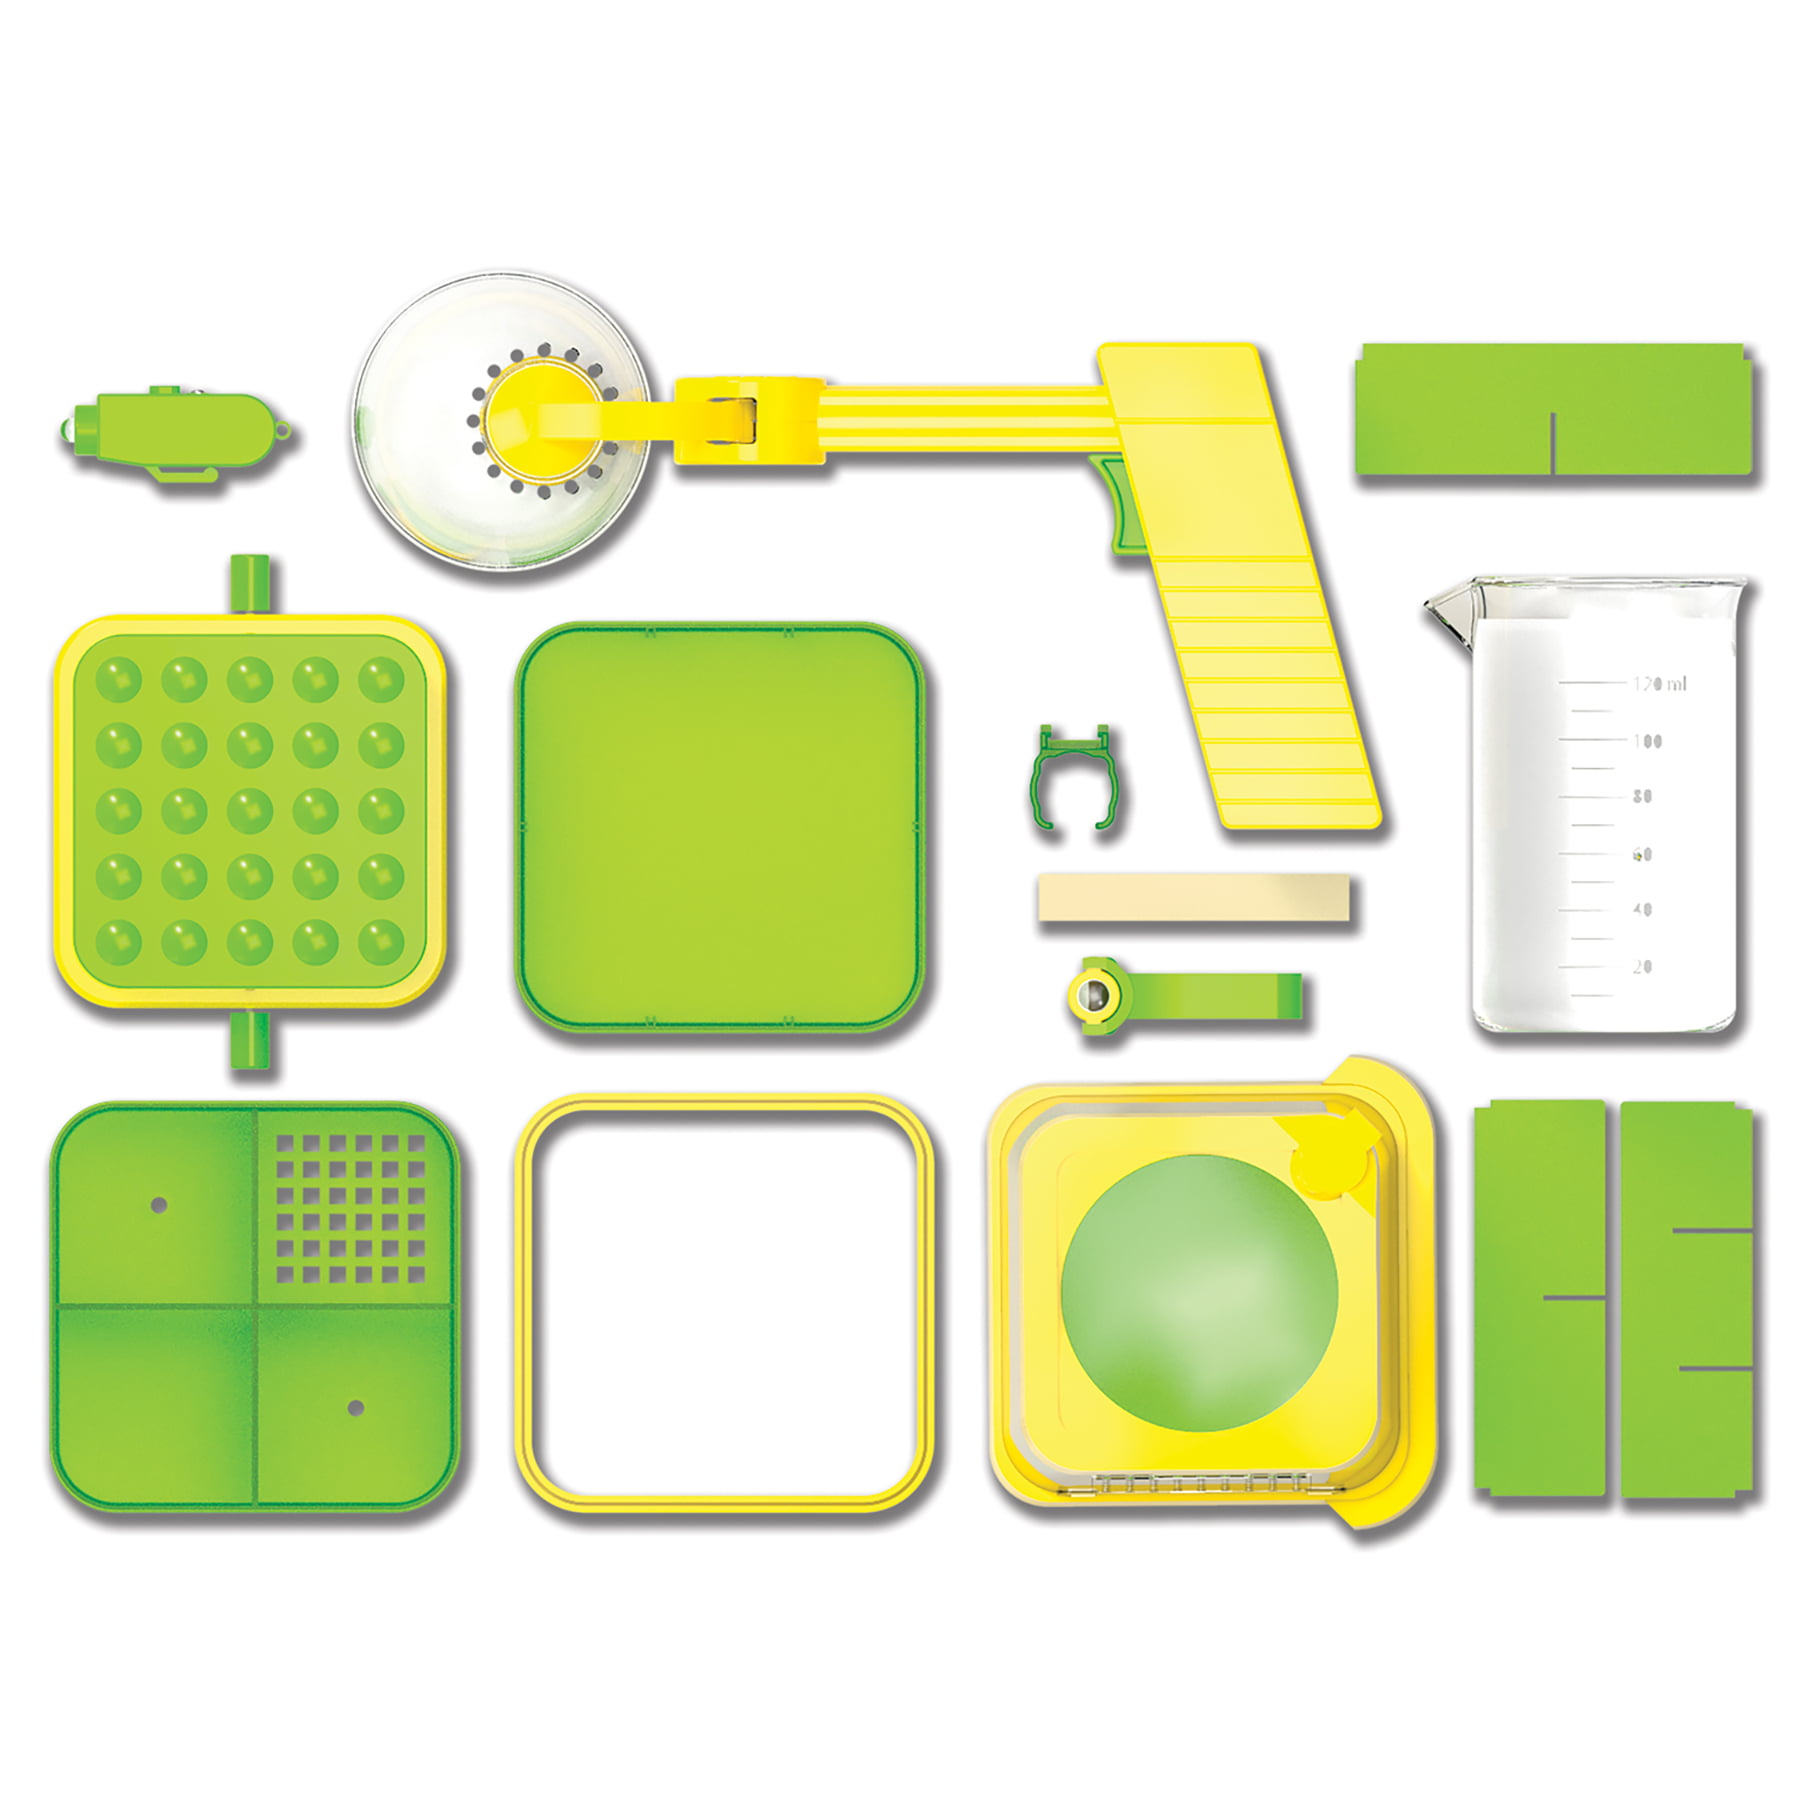 SmartLab Toys Kitchen Science Lab with 40 Activites to Amaze and